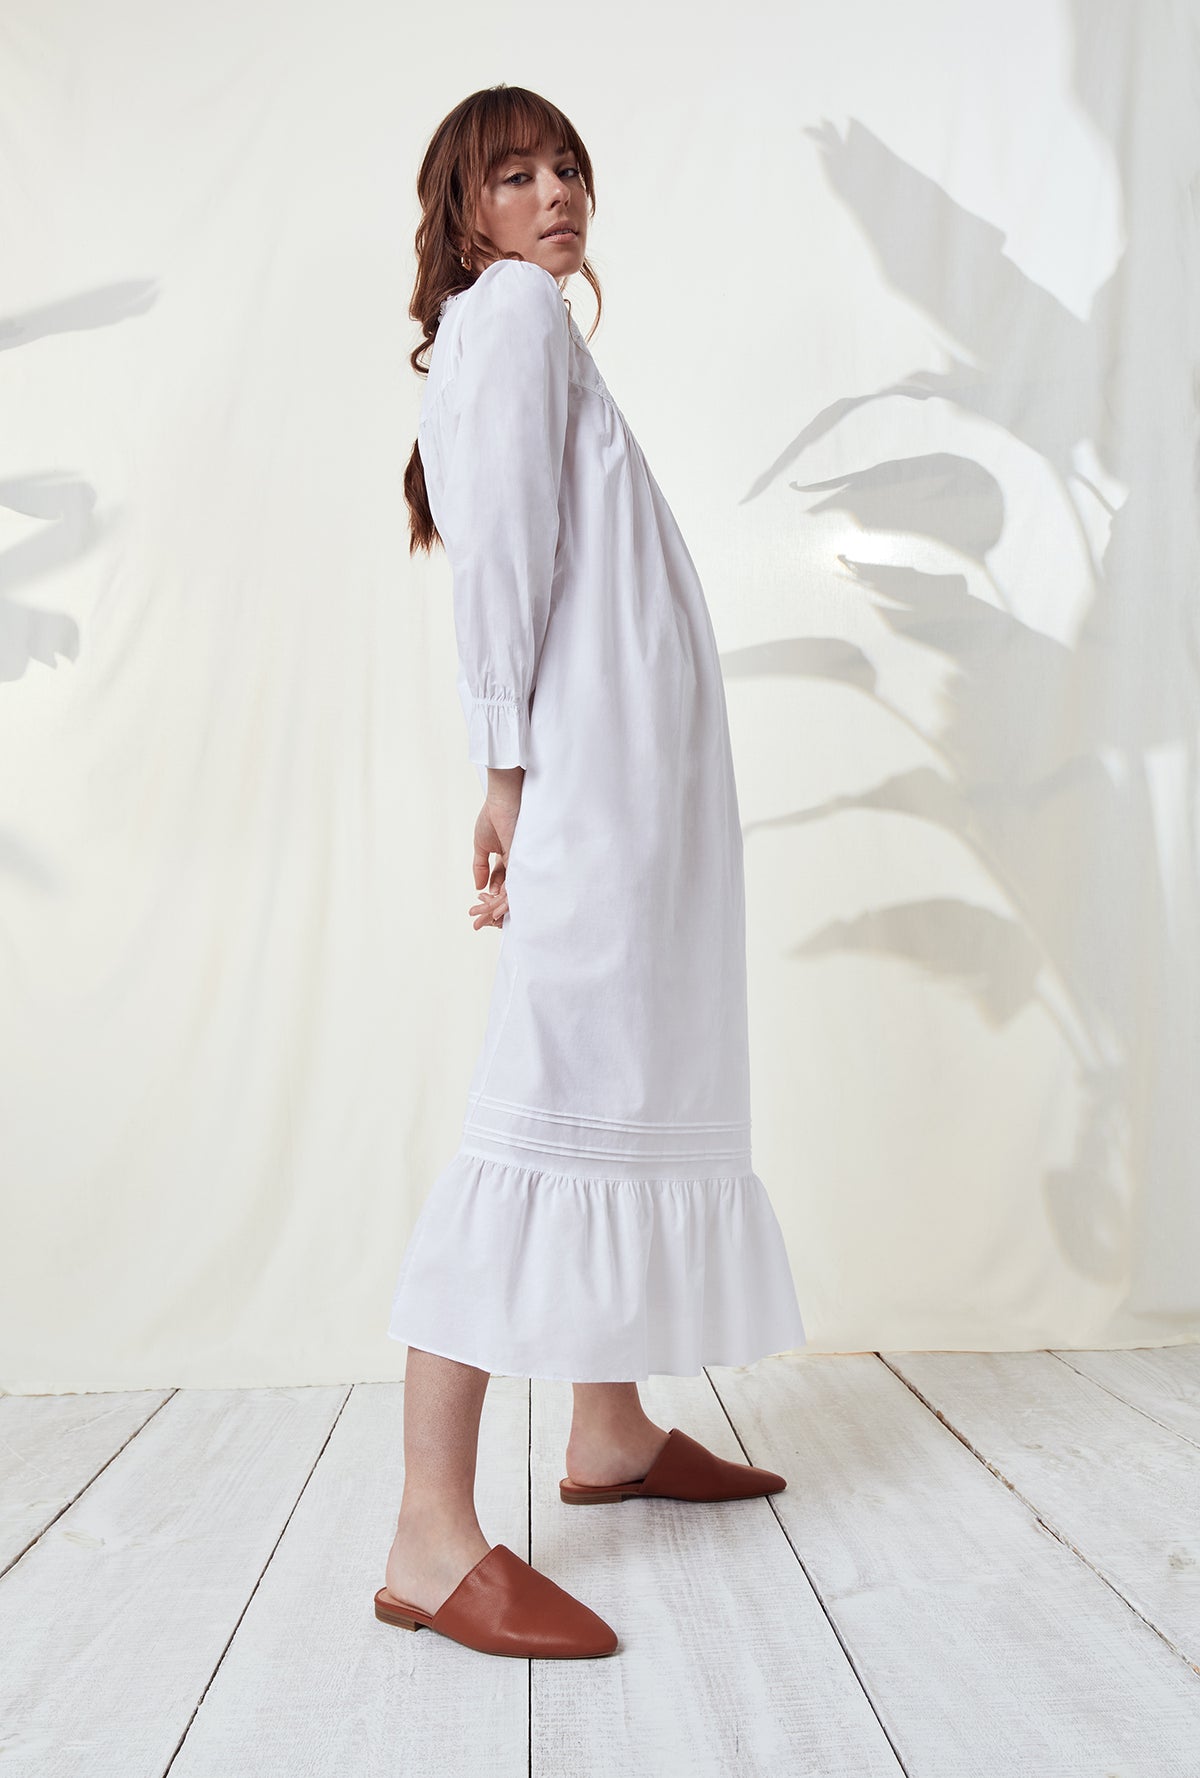 A lady wearing a white long sleeve nightgown.